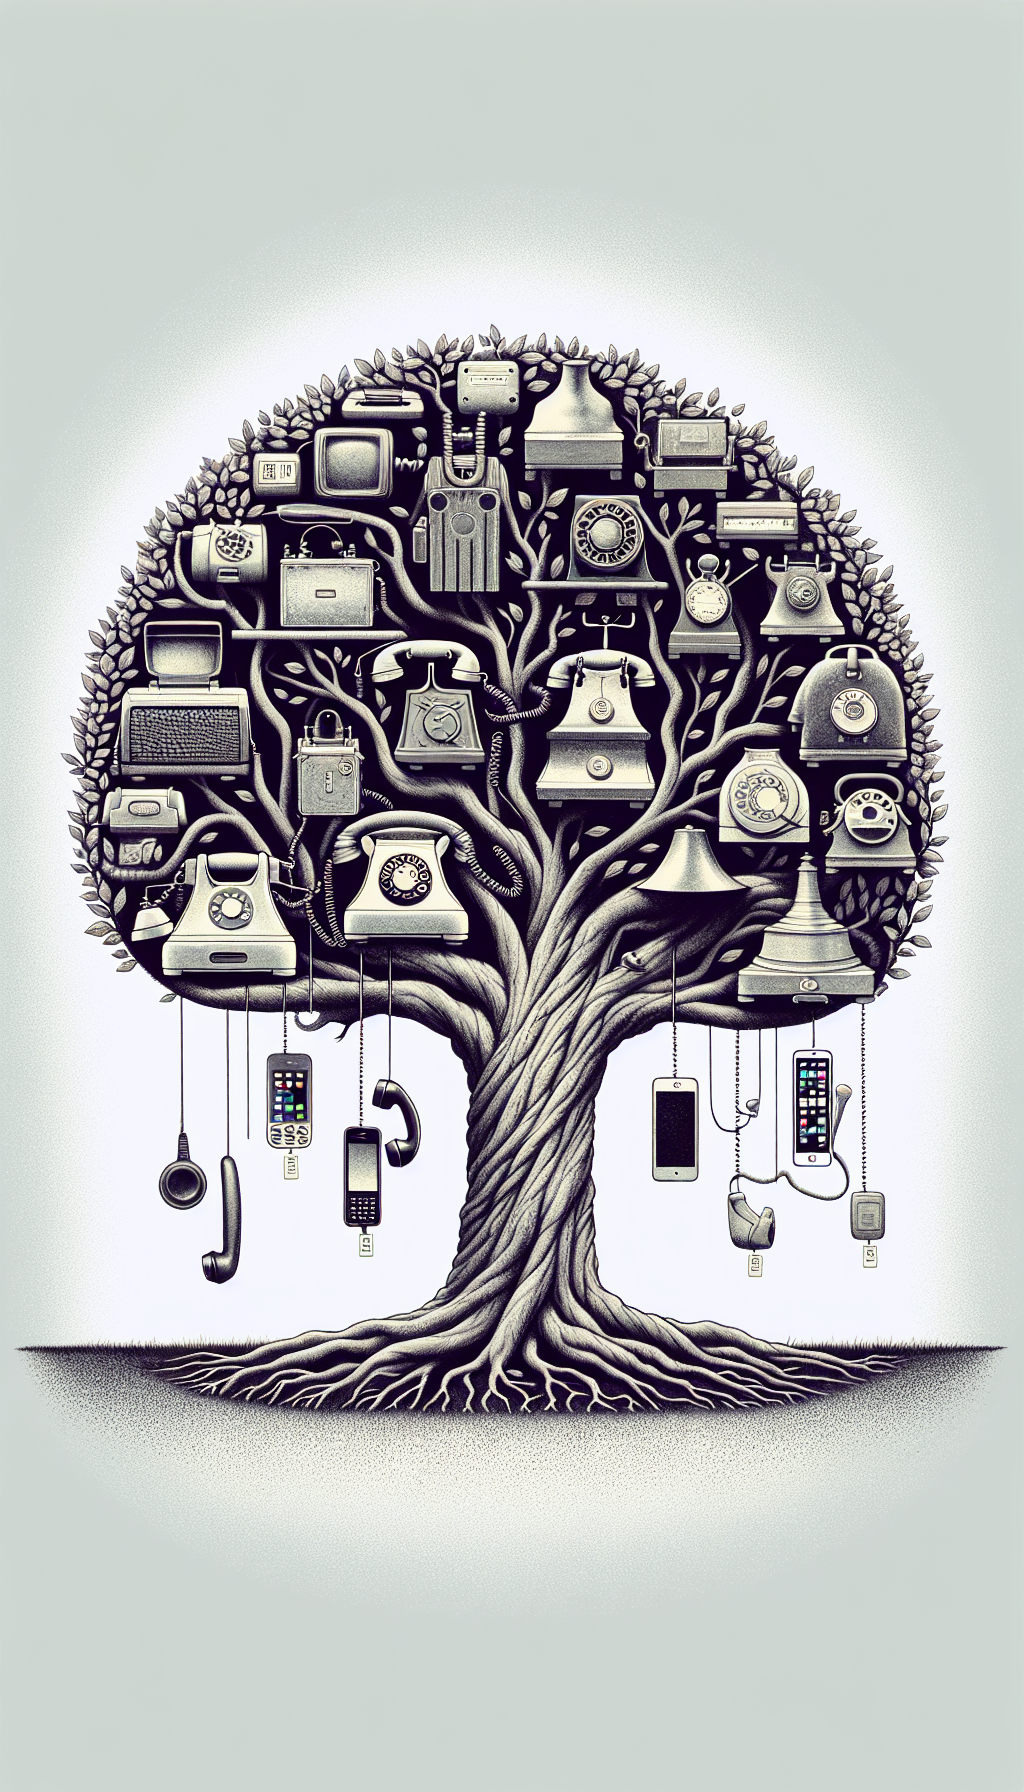 A whimsical illustration shows a tree of telephones with roots symbolizing ancient communication forms—drums, smoke signals, and carrier pigeons—while the trunk transitions through telegraph and rotary phones, up to the crown showcasing a gleaming antique telephone, with price tags as leaves, suggesting its value among the branches of modern smartphones and digital devices, embodying the fusion of historical significance and collectible worth.